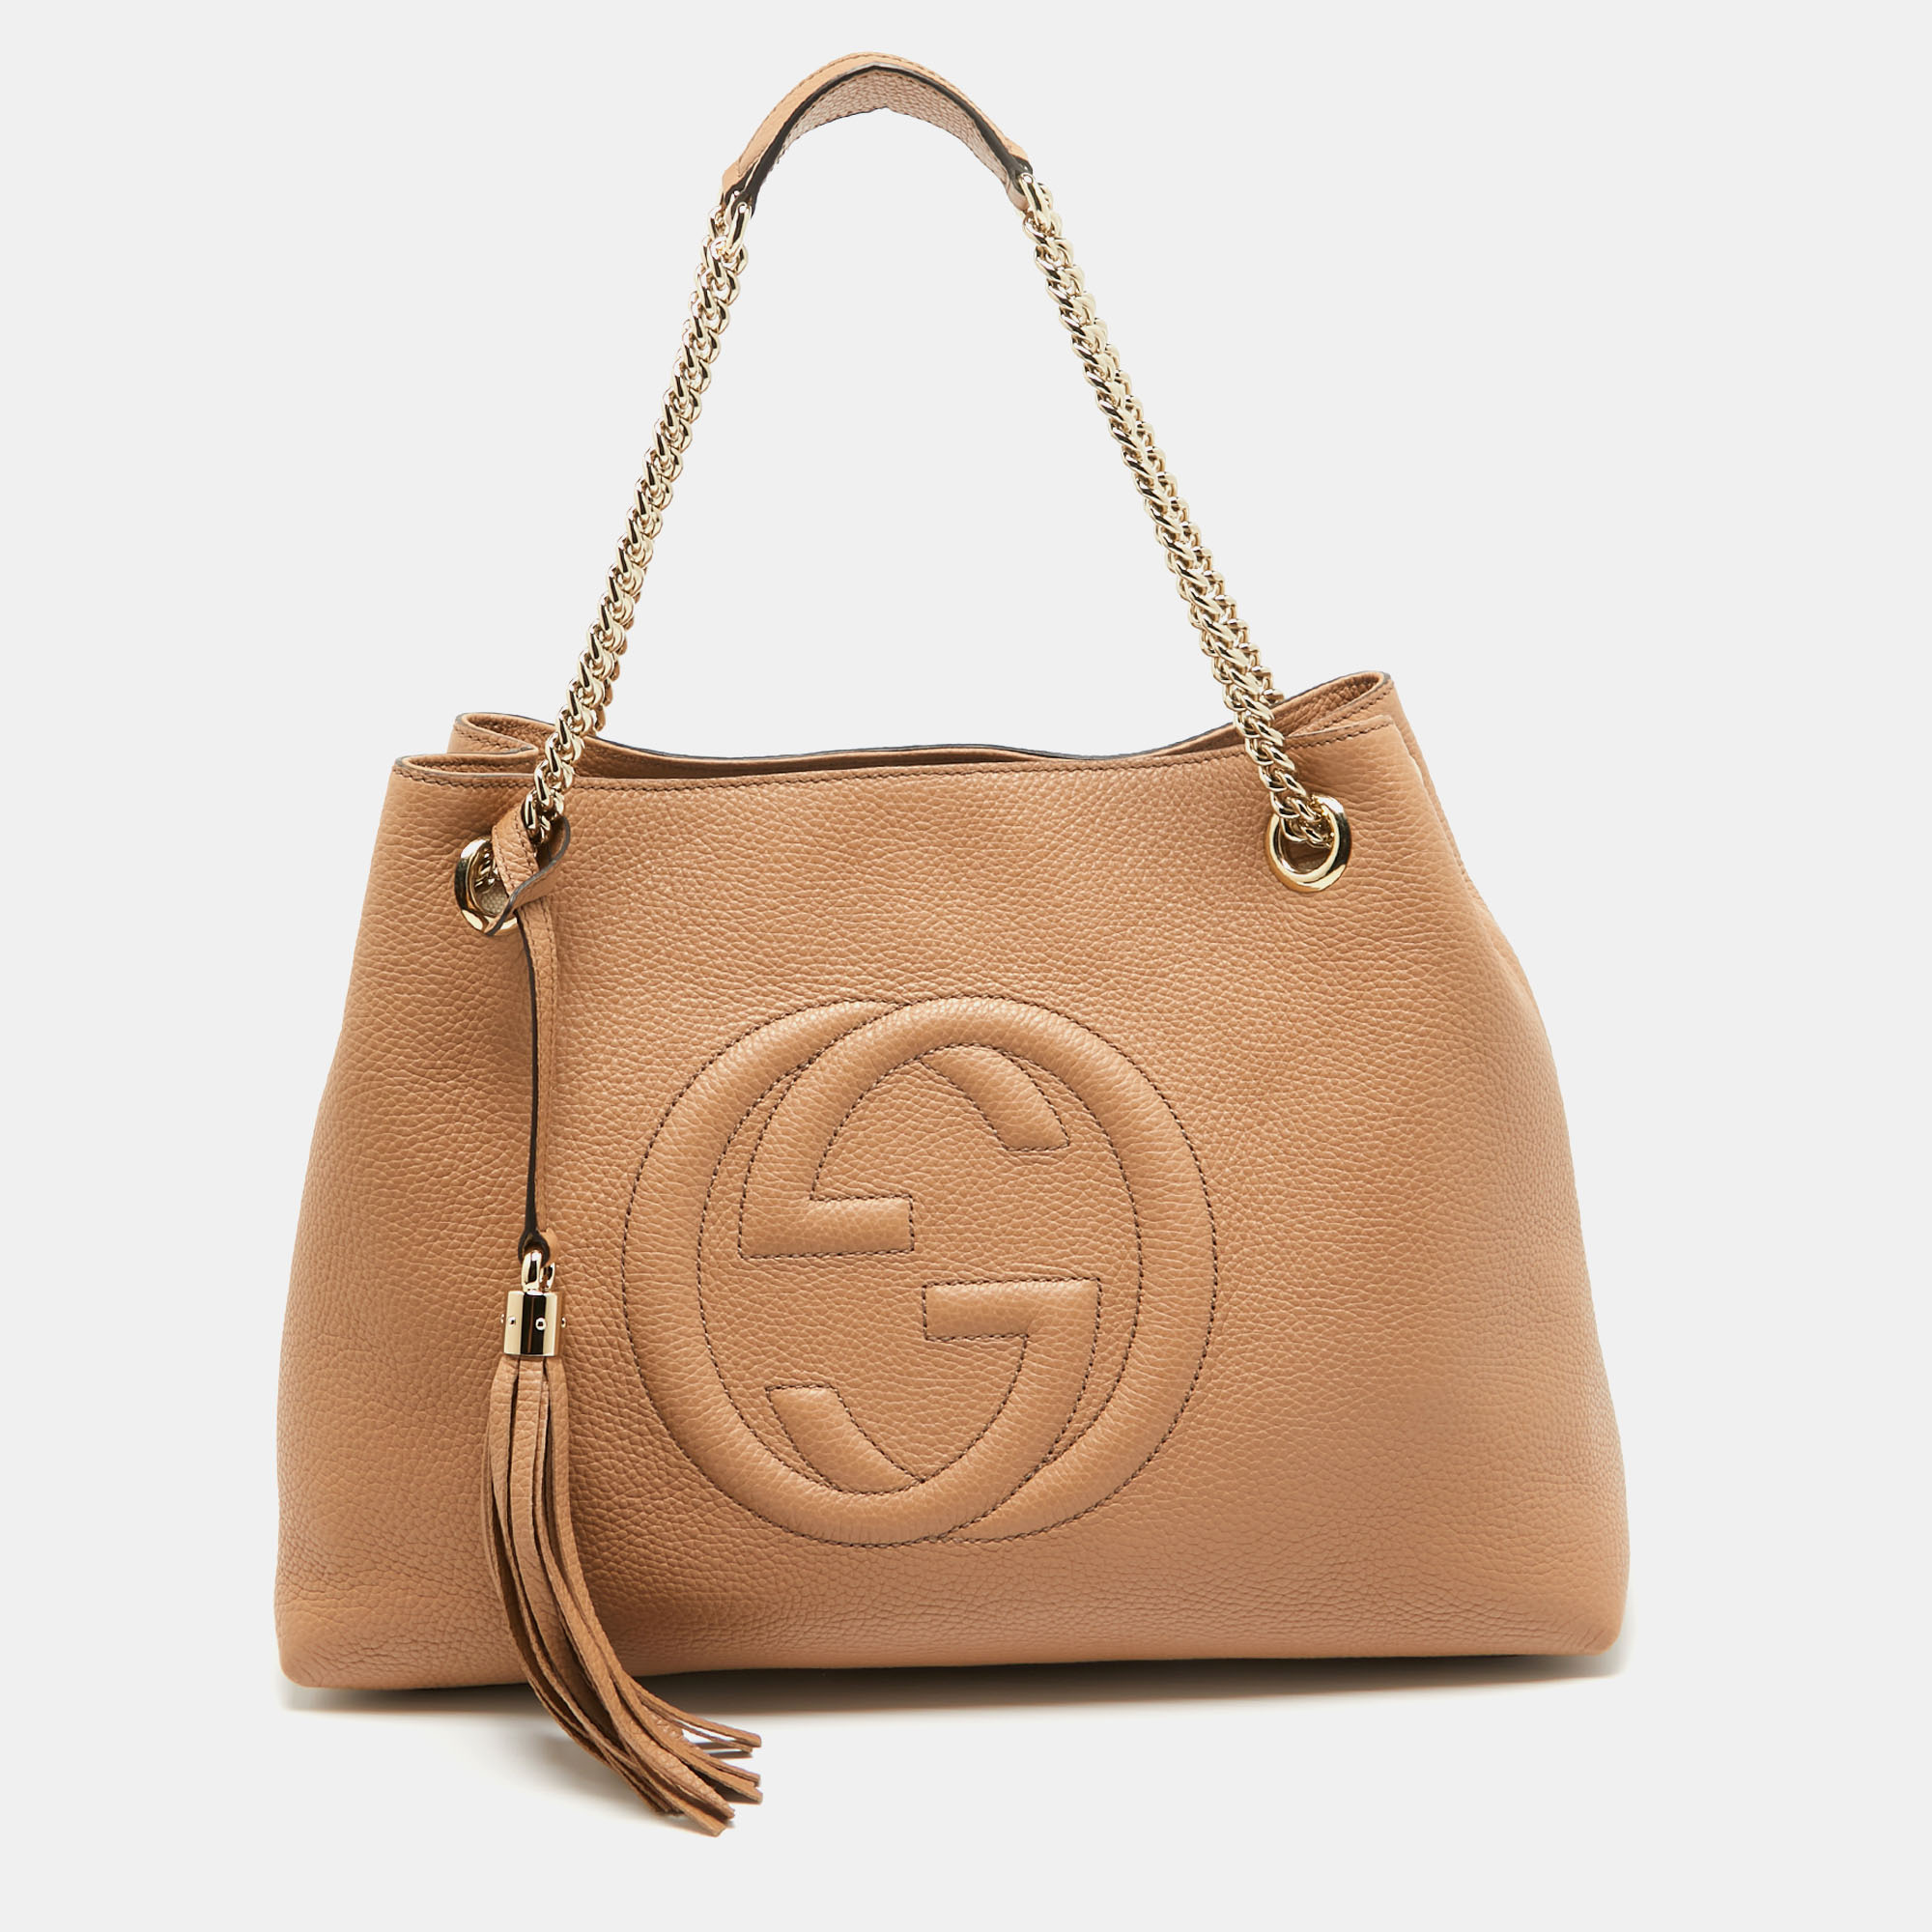 Pre-owned Gucci Tan Leather Medium Soho Chain Shoulder Bag